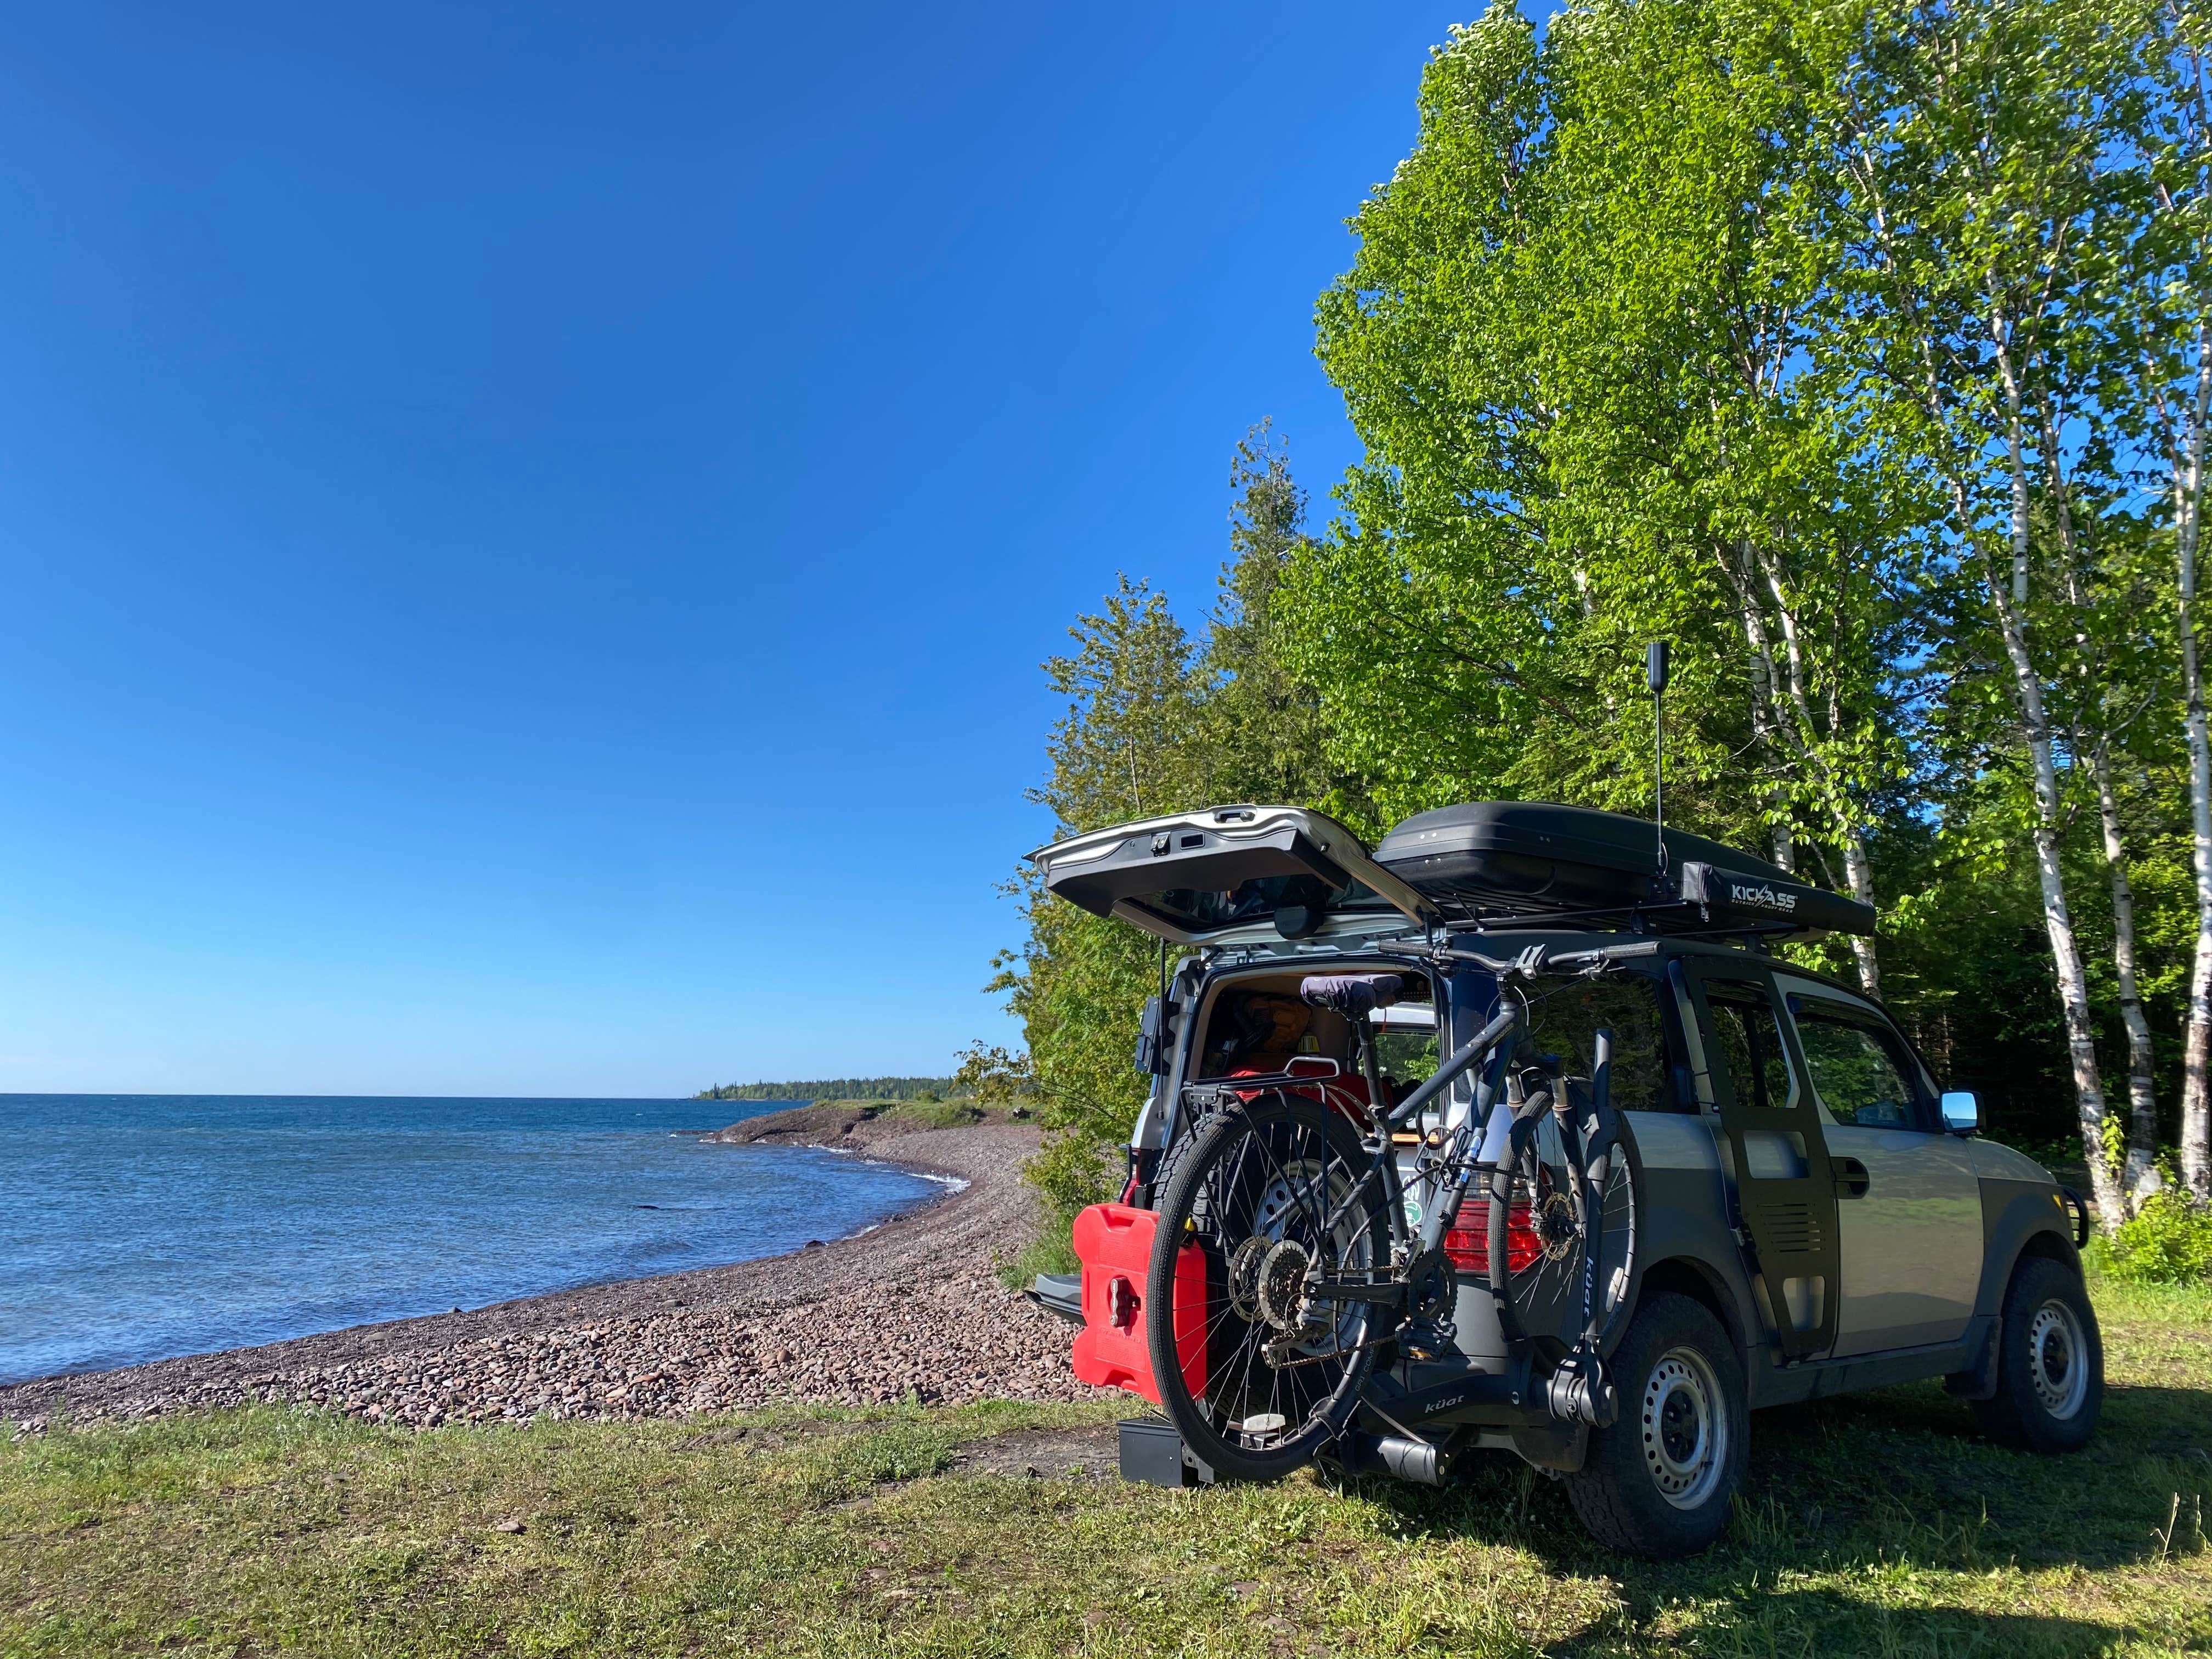 Camper submitted image from Keweenaw Peninsula High Rock Bay - 1